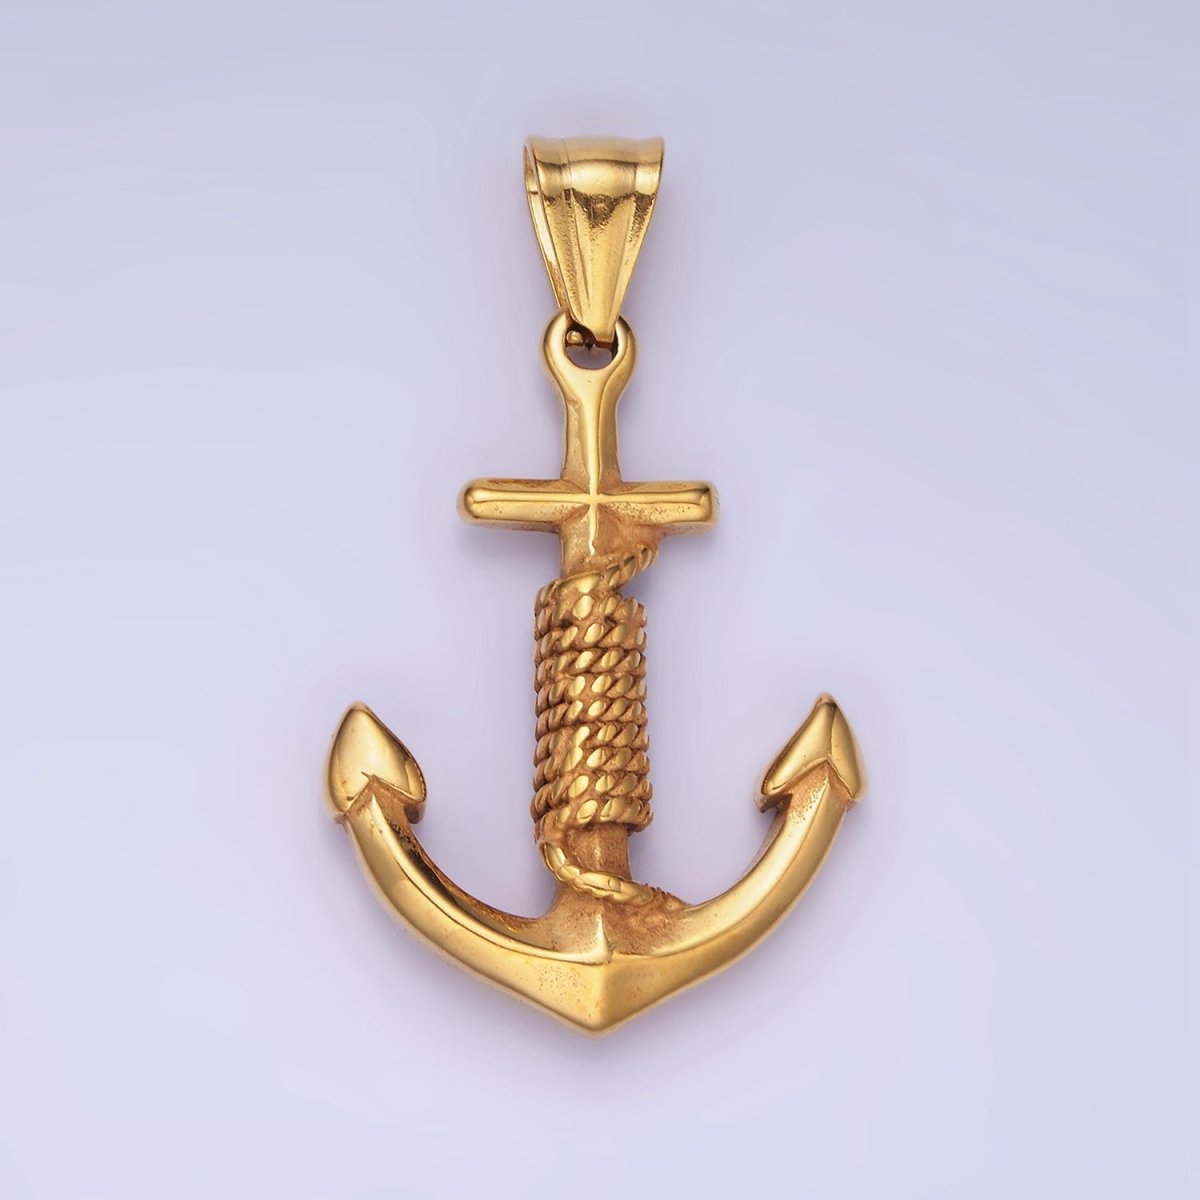 Big Nautical Charm Stainless Steel 42mm Anchor With Rope Pendant Christian Religious Jewelry Making Supply | P-1194 - DLUXCA